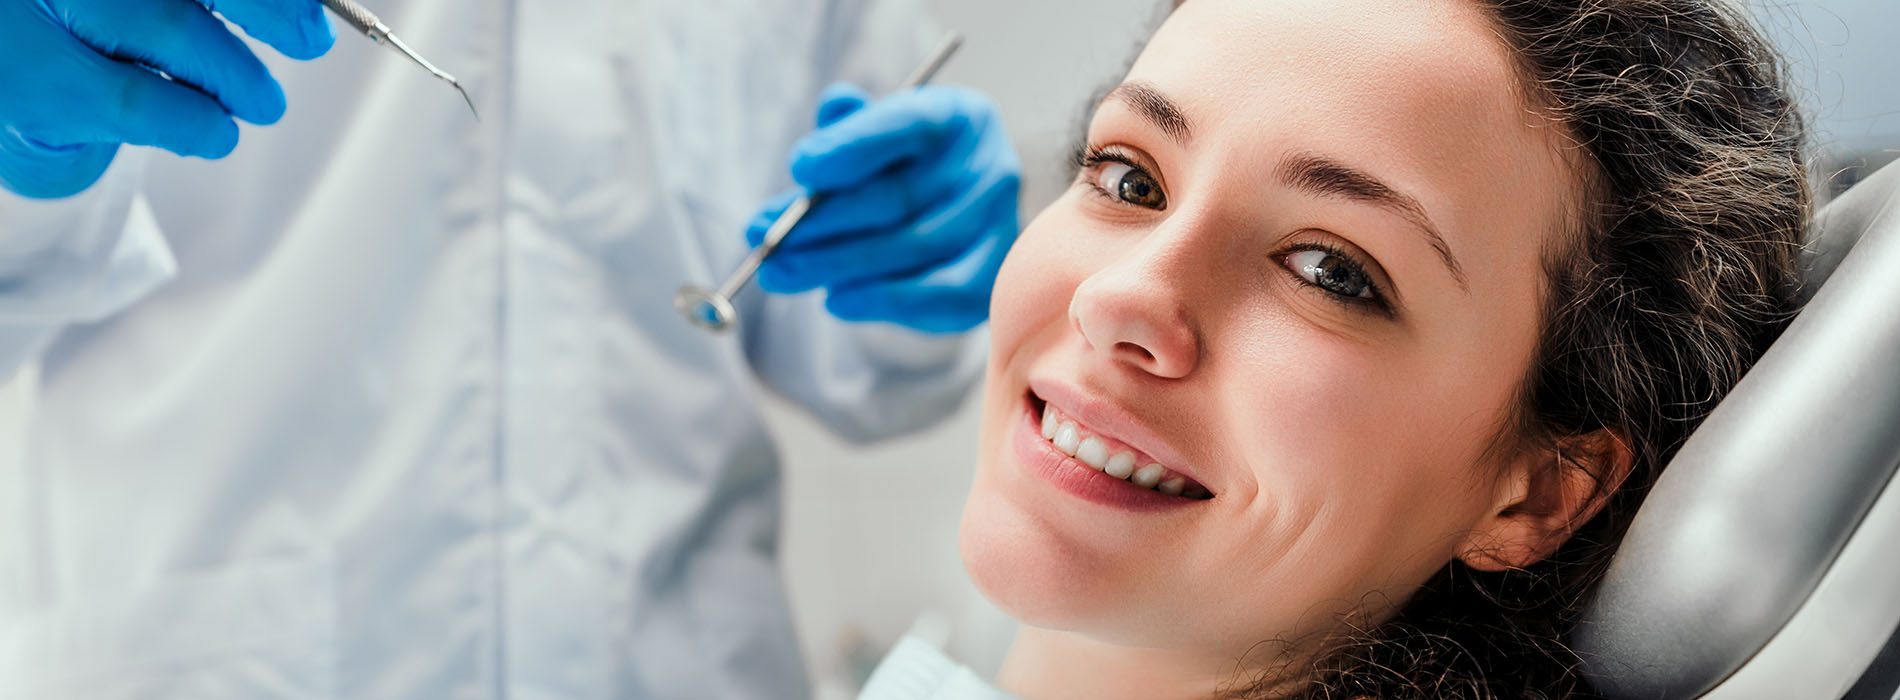 Cameron Park Dental Care | Inlays  amp  Onlays, Root Canals and Sedation Dentistry